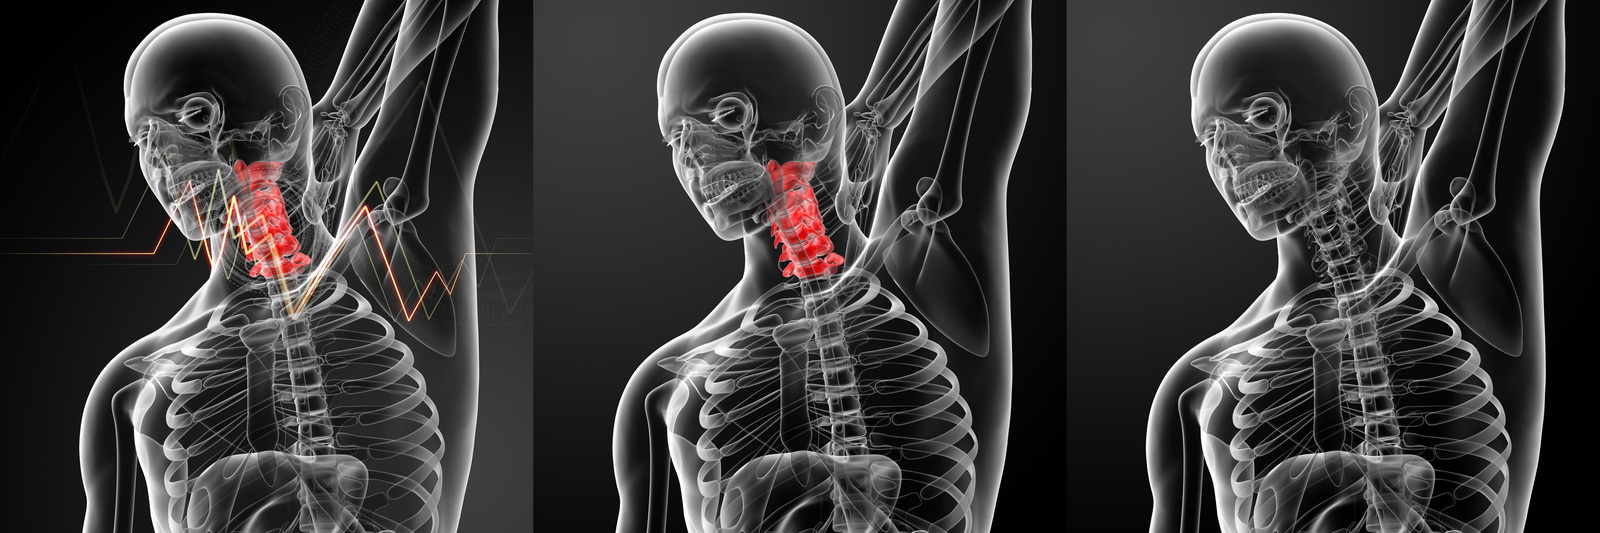 whiplash and back pain compensation